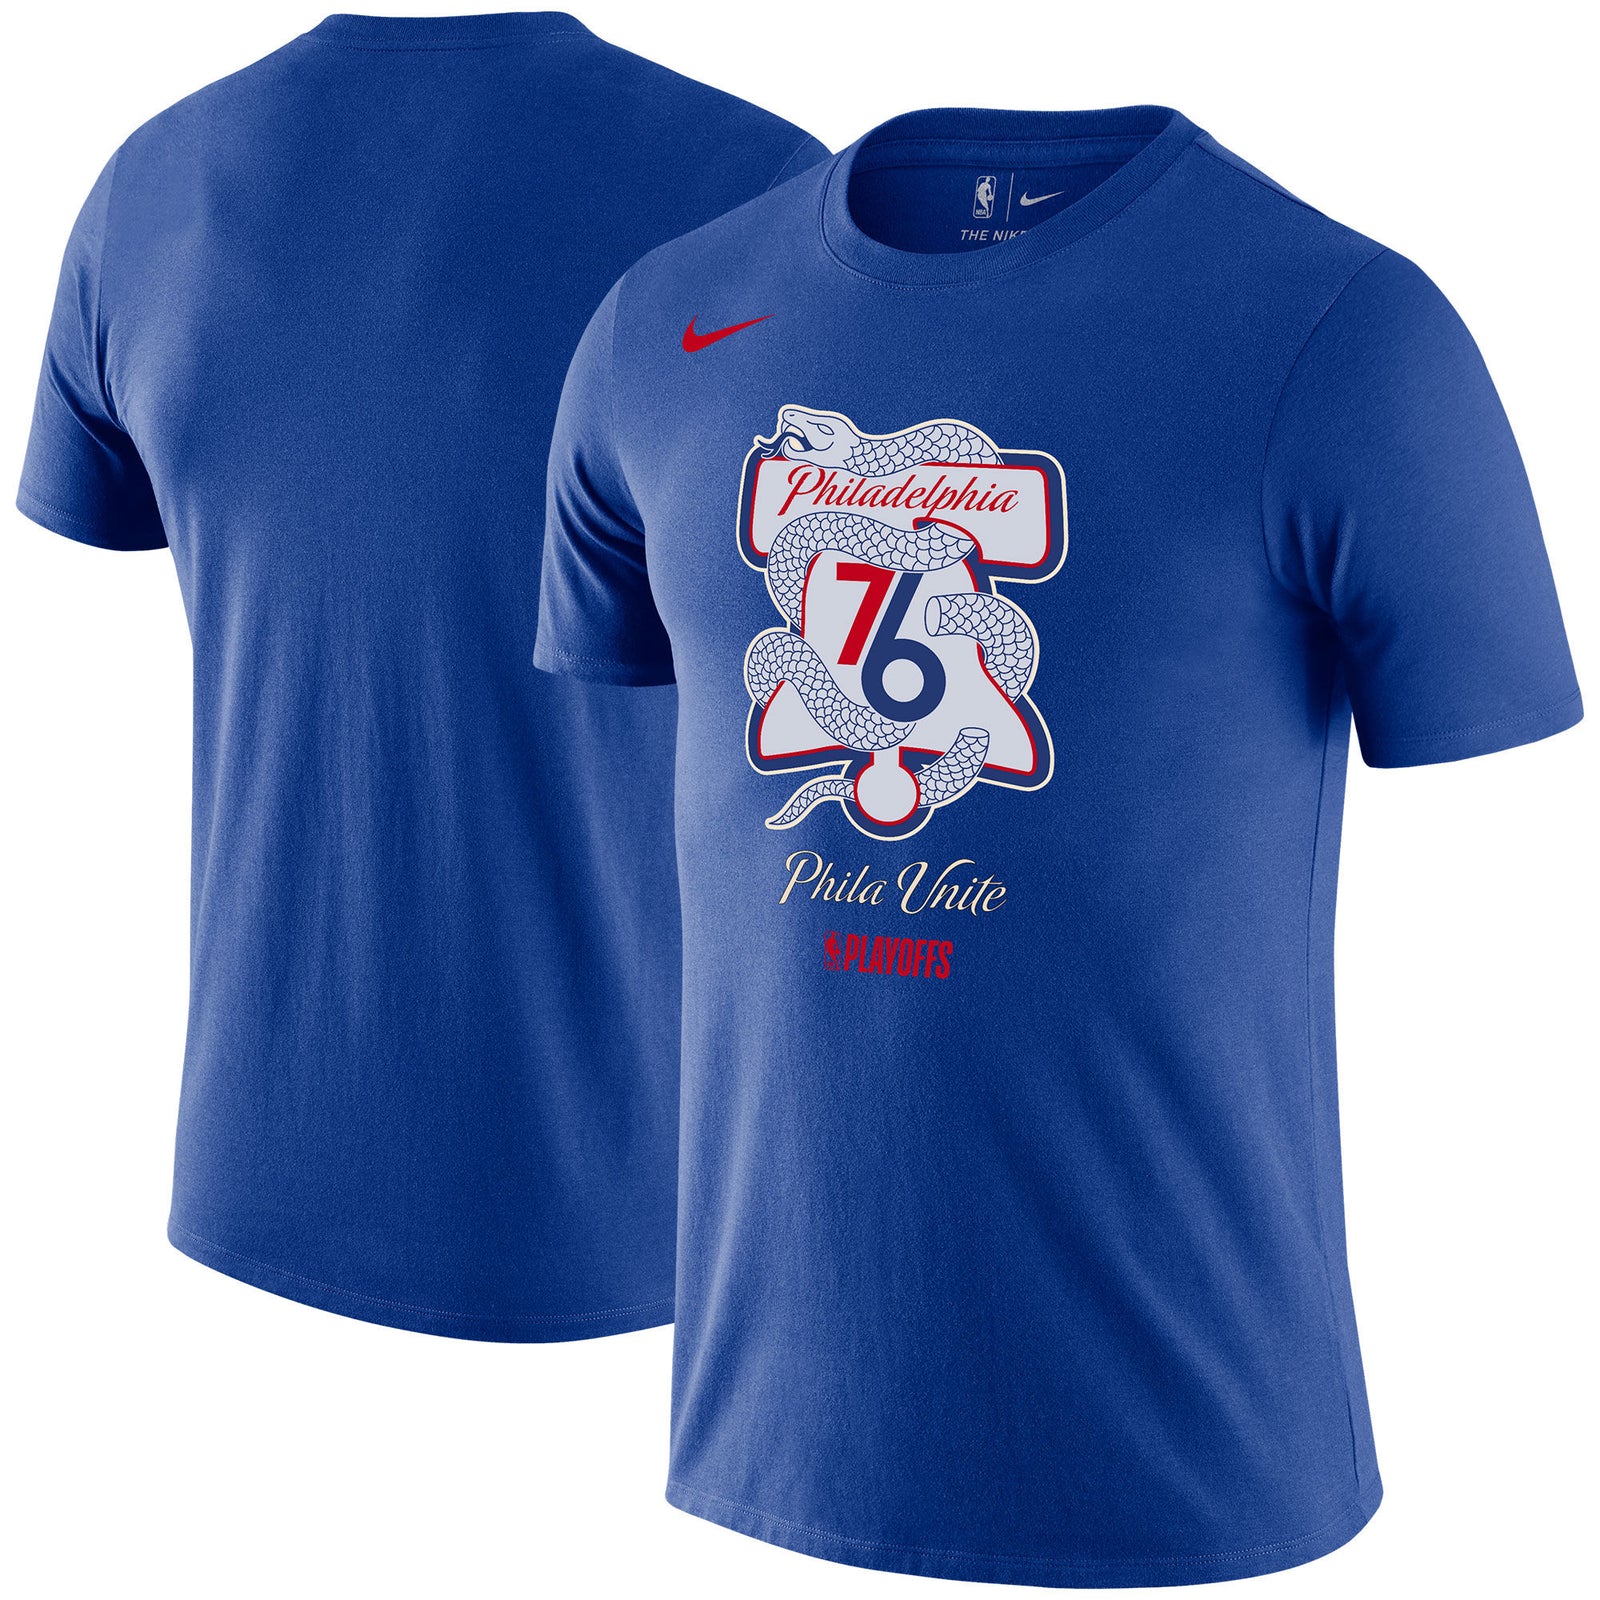 The Famous Sixers Playoff Shirt 